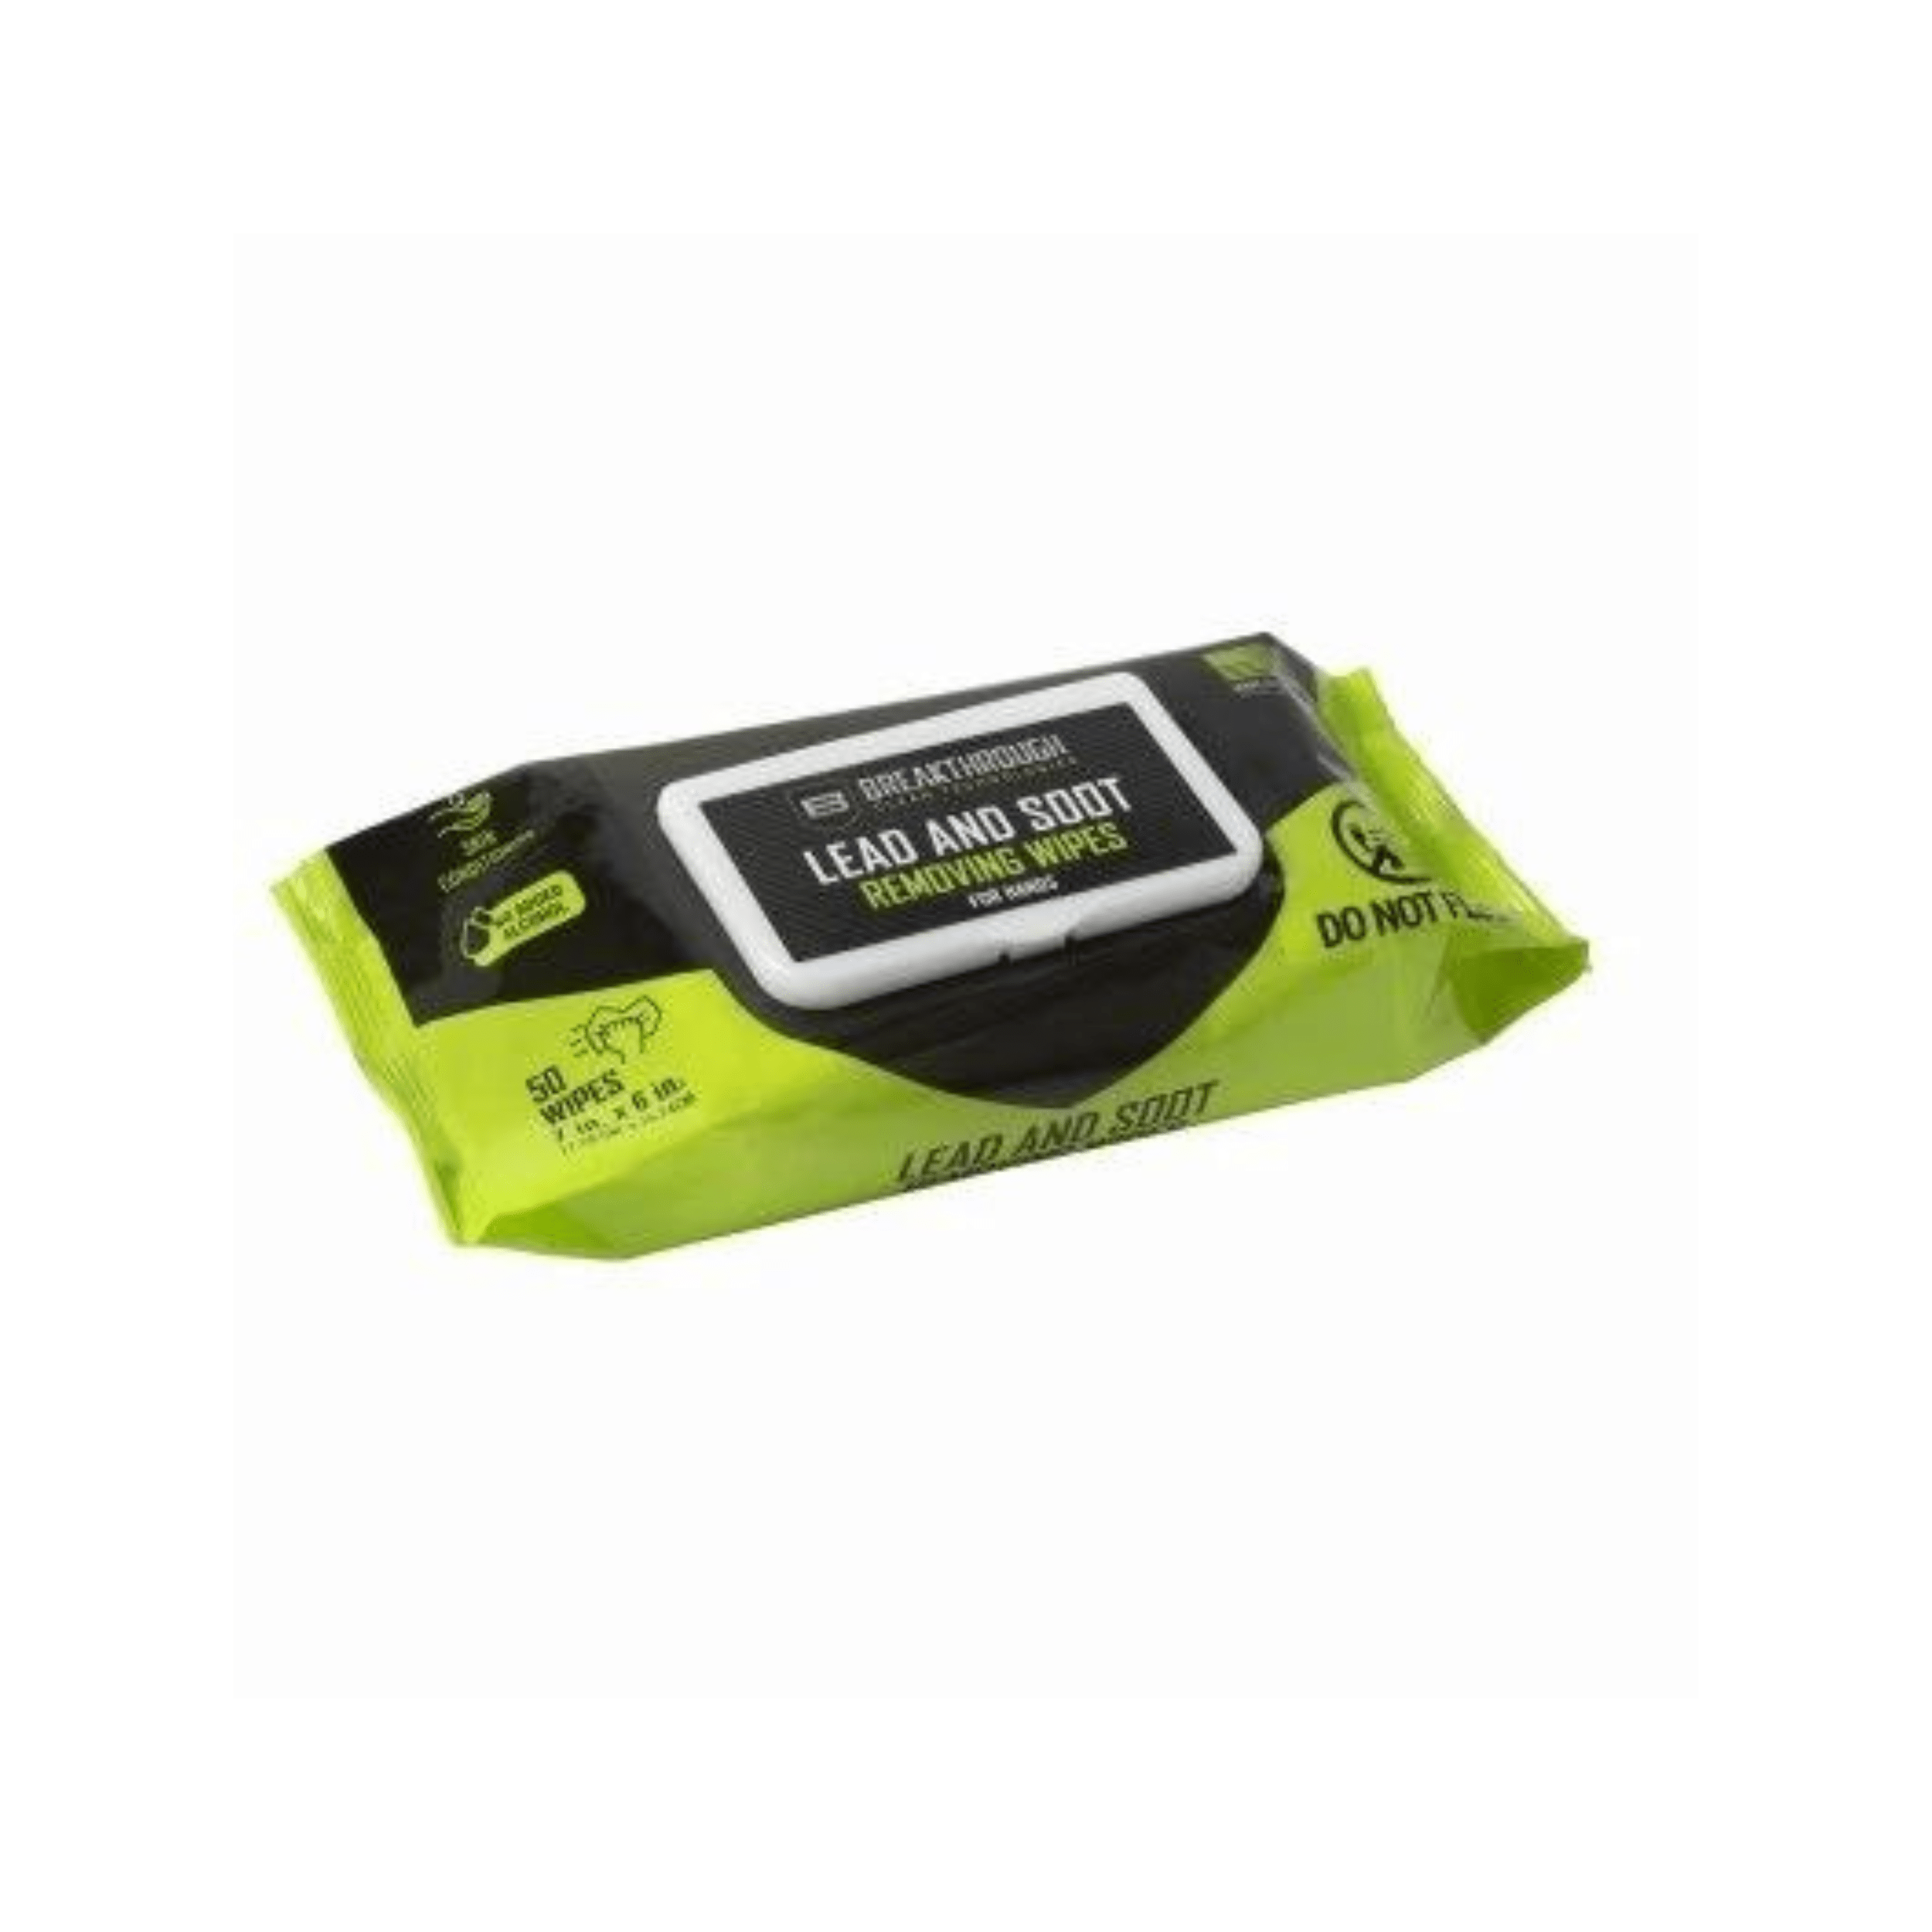 Breakthrough Clean Lead and Heavy Metal Removal Wipes